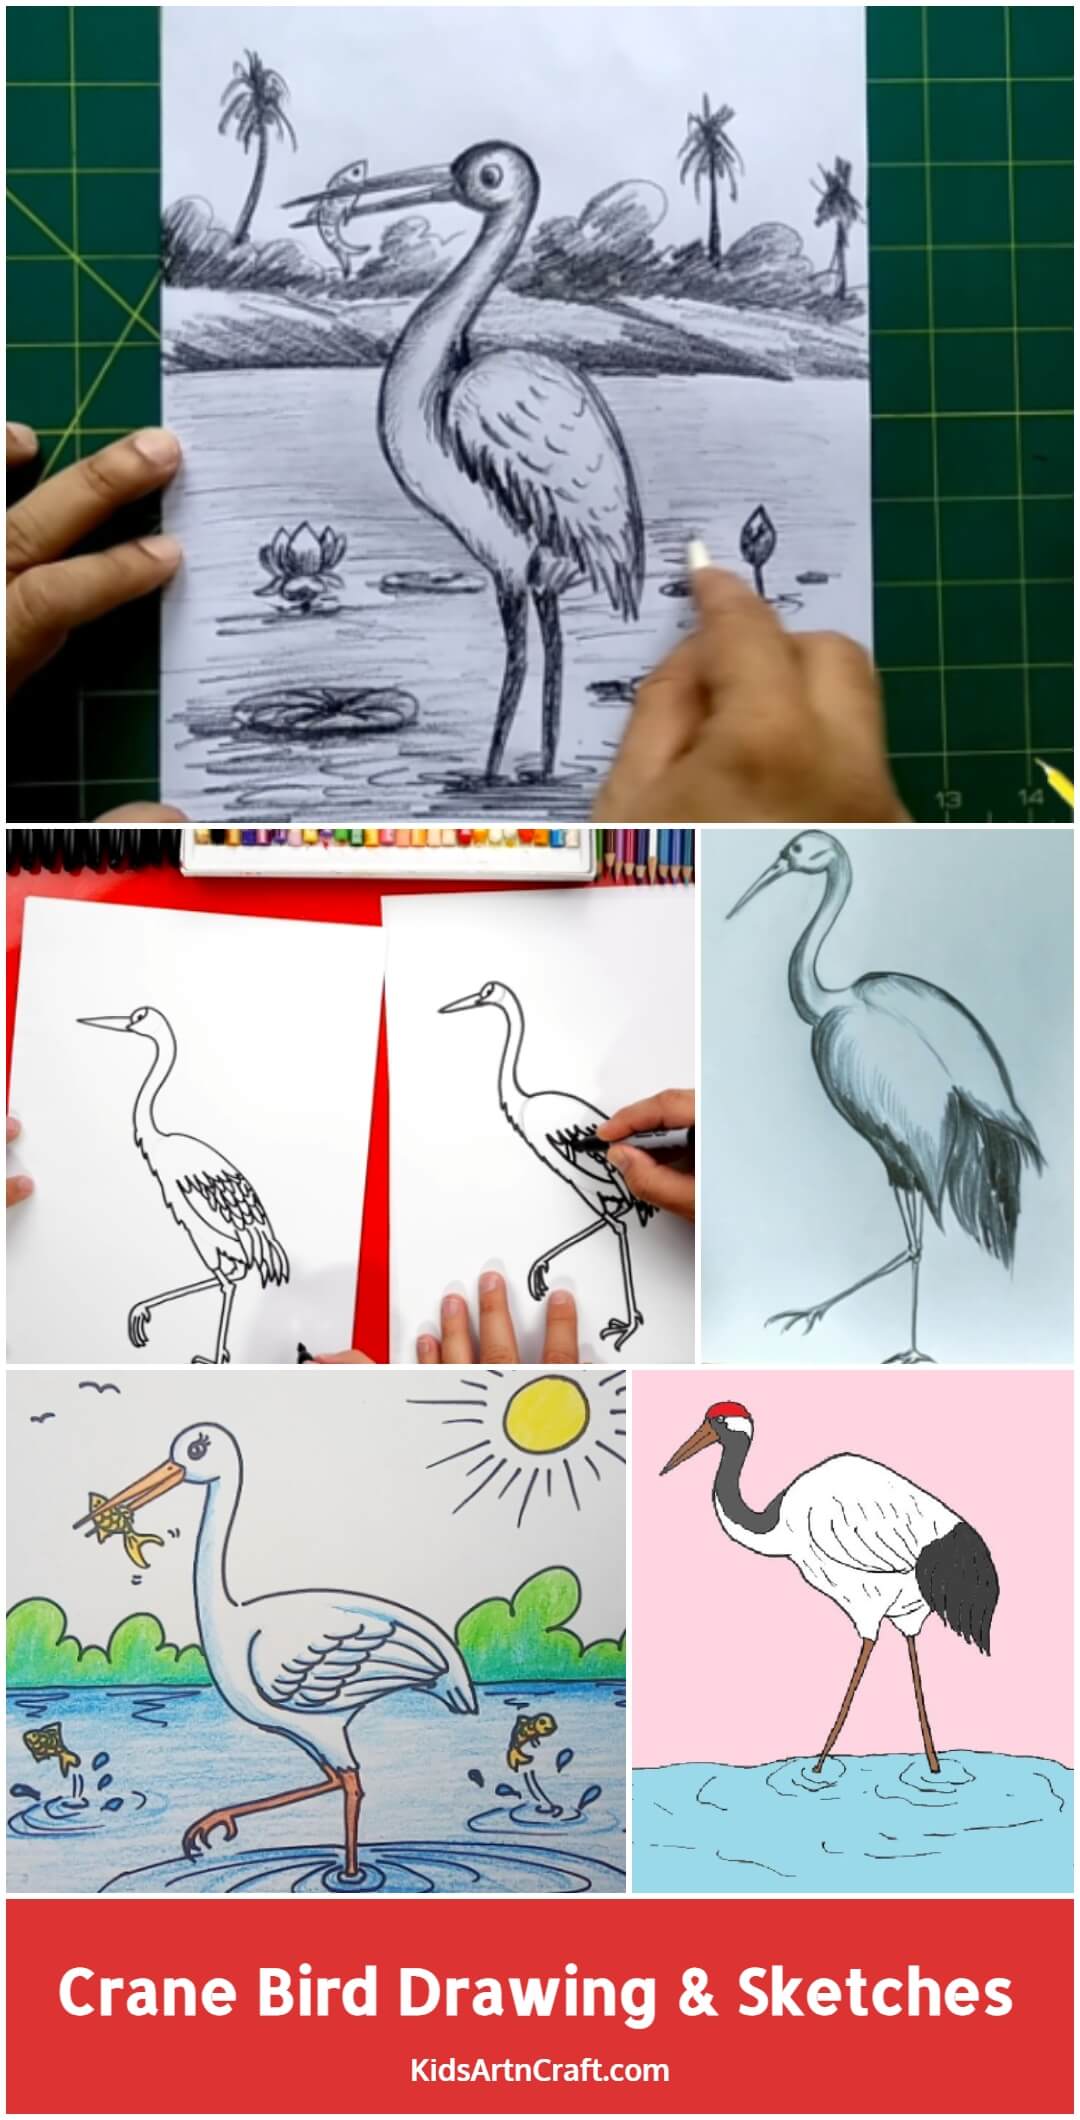 Crane Bird Drawing & Sketches for Kids